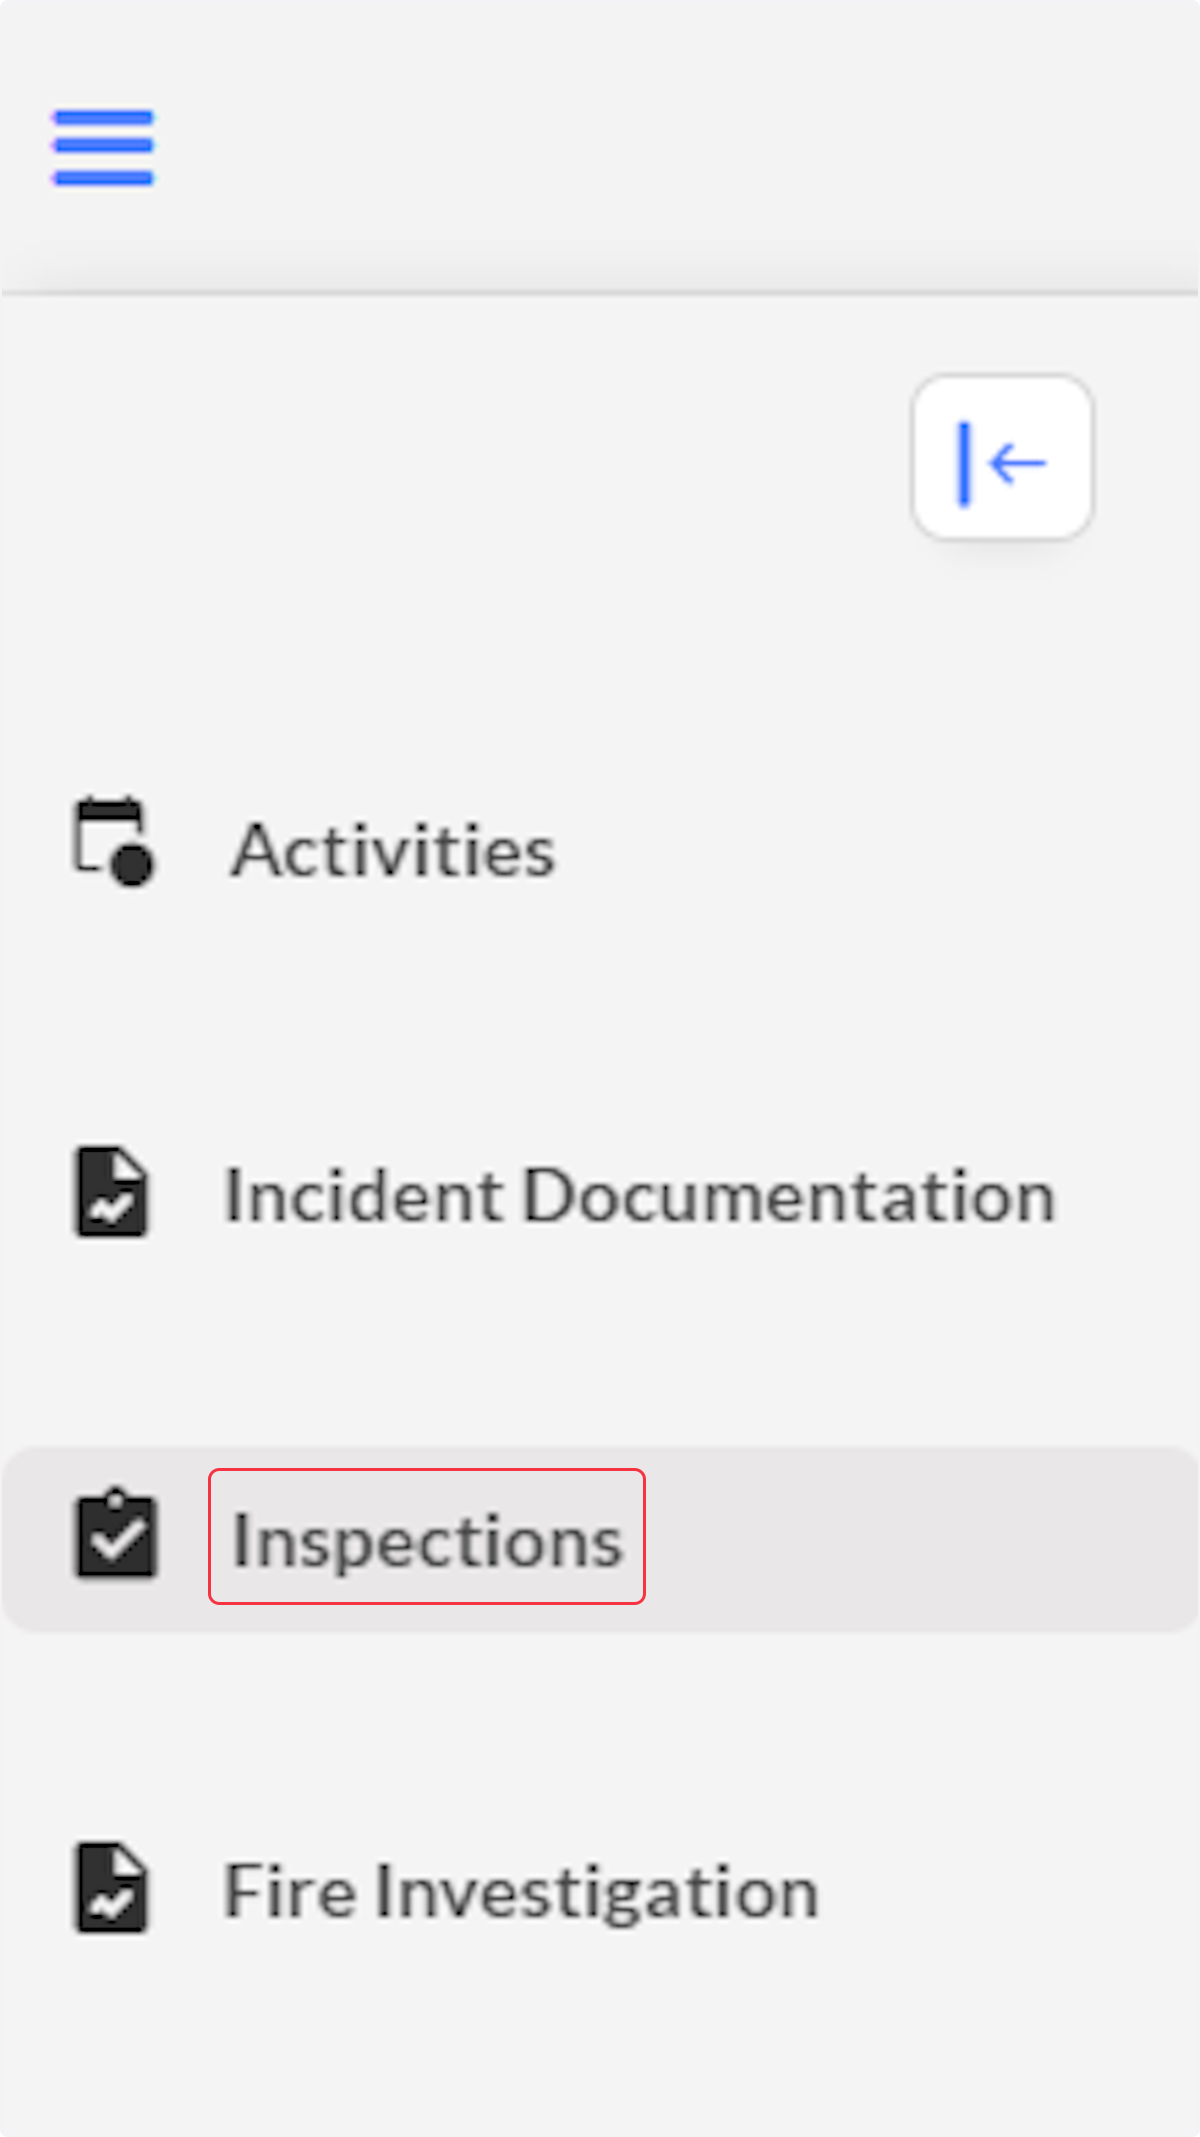 Navigate to Inspections.